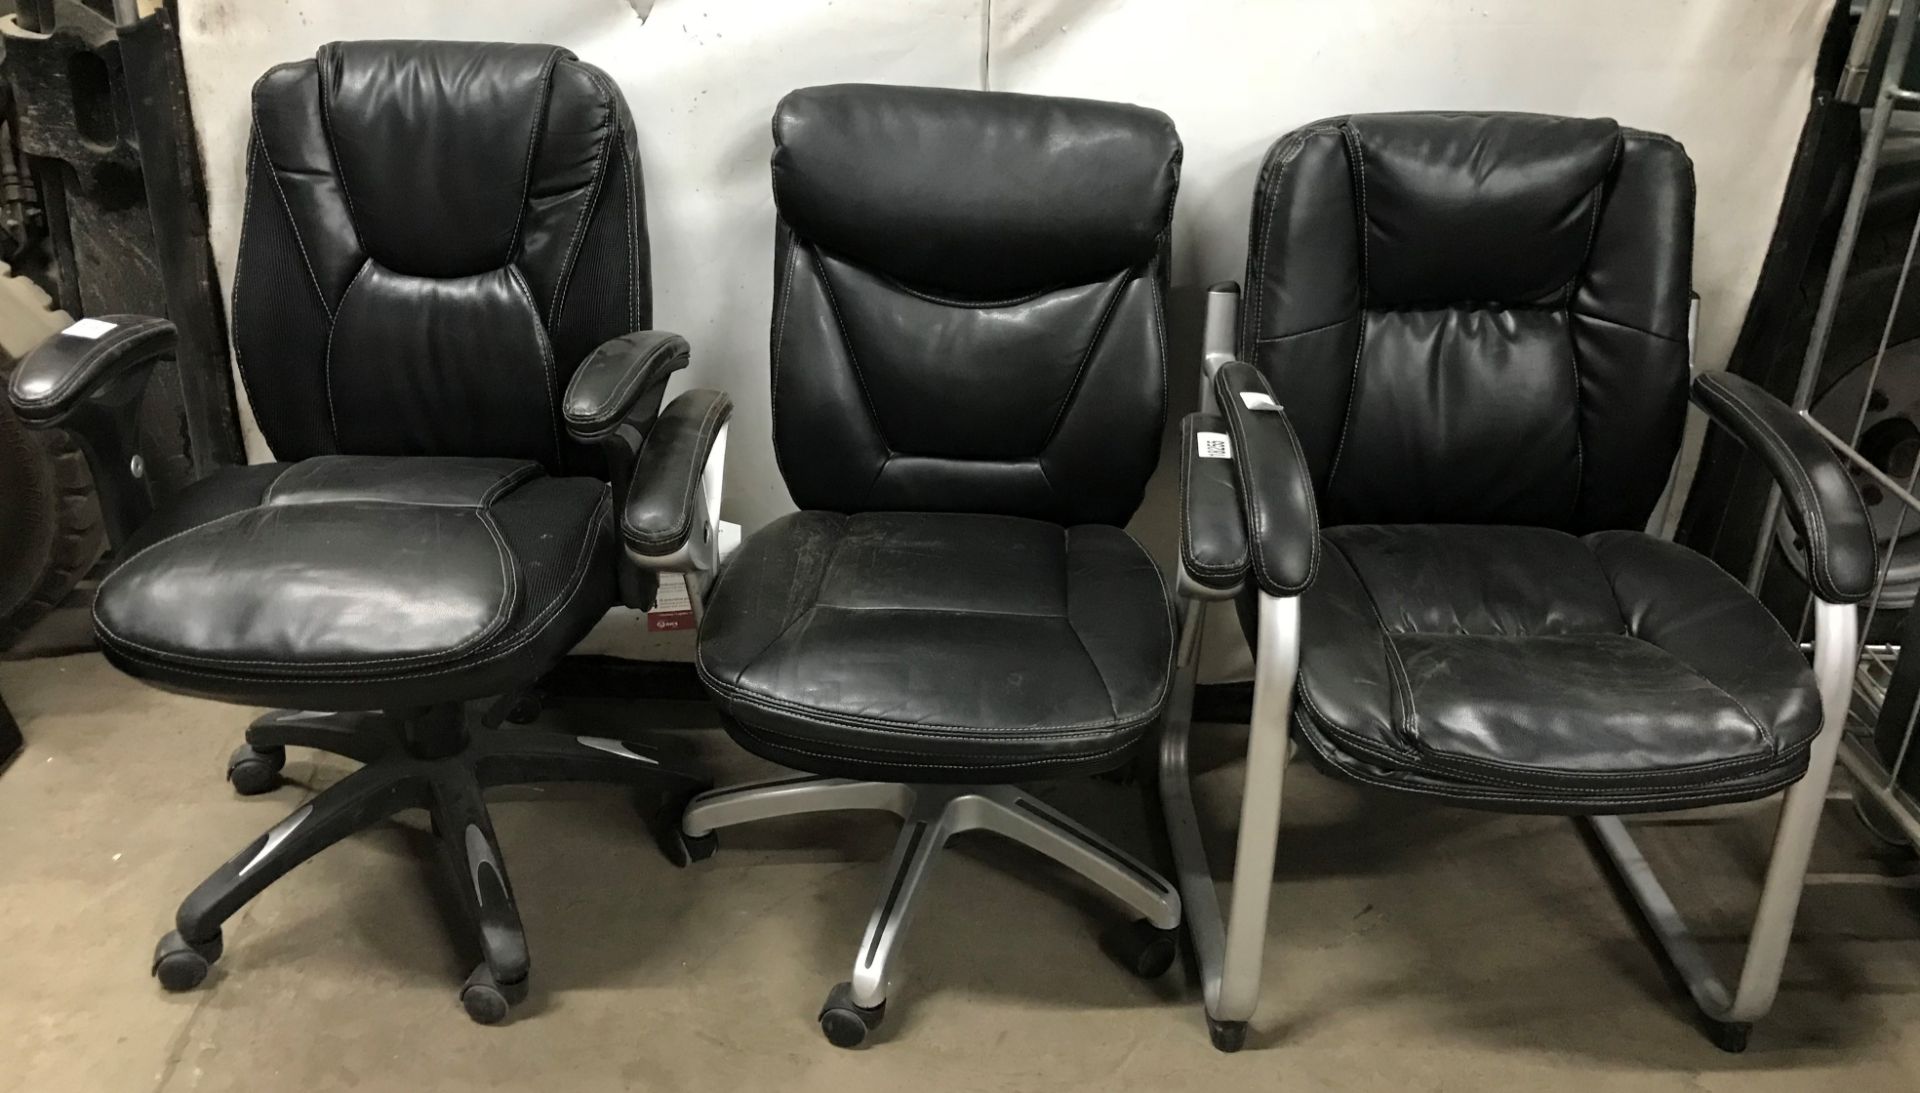 3 x Executive Office/Meeting Chairs - in Black